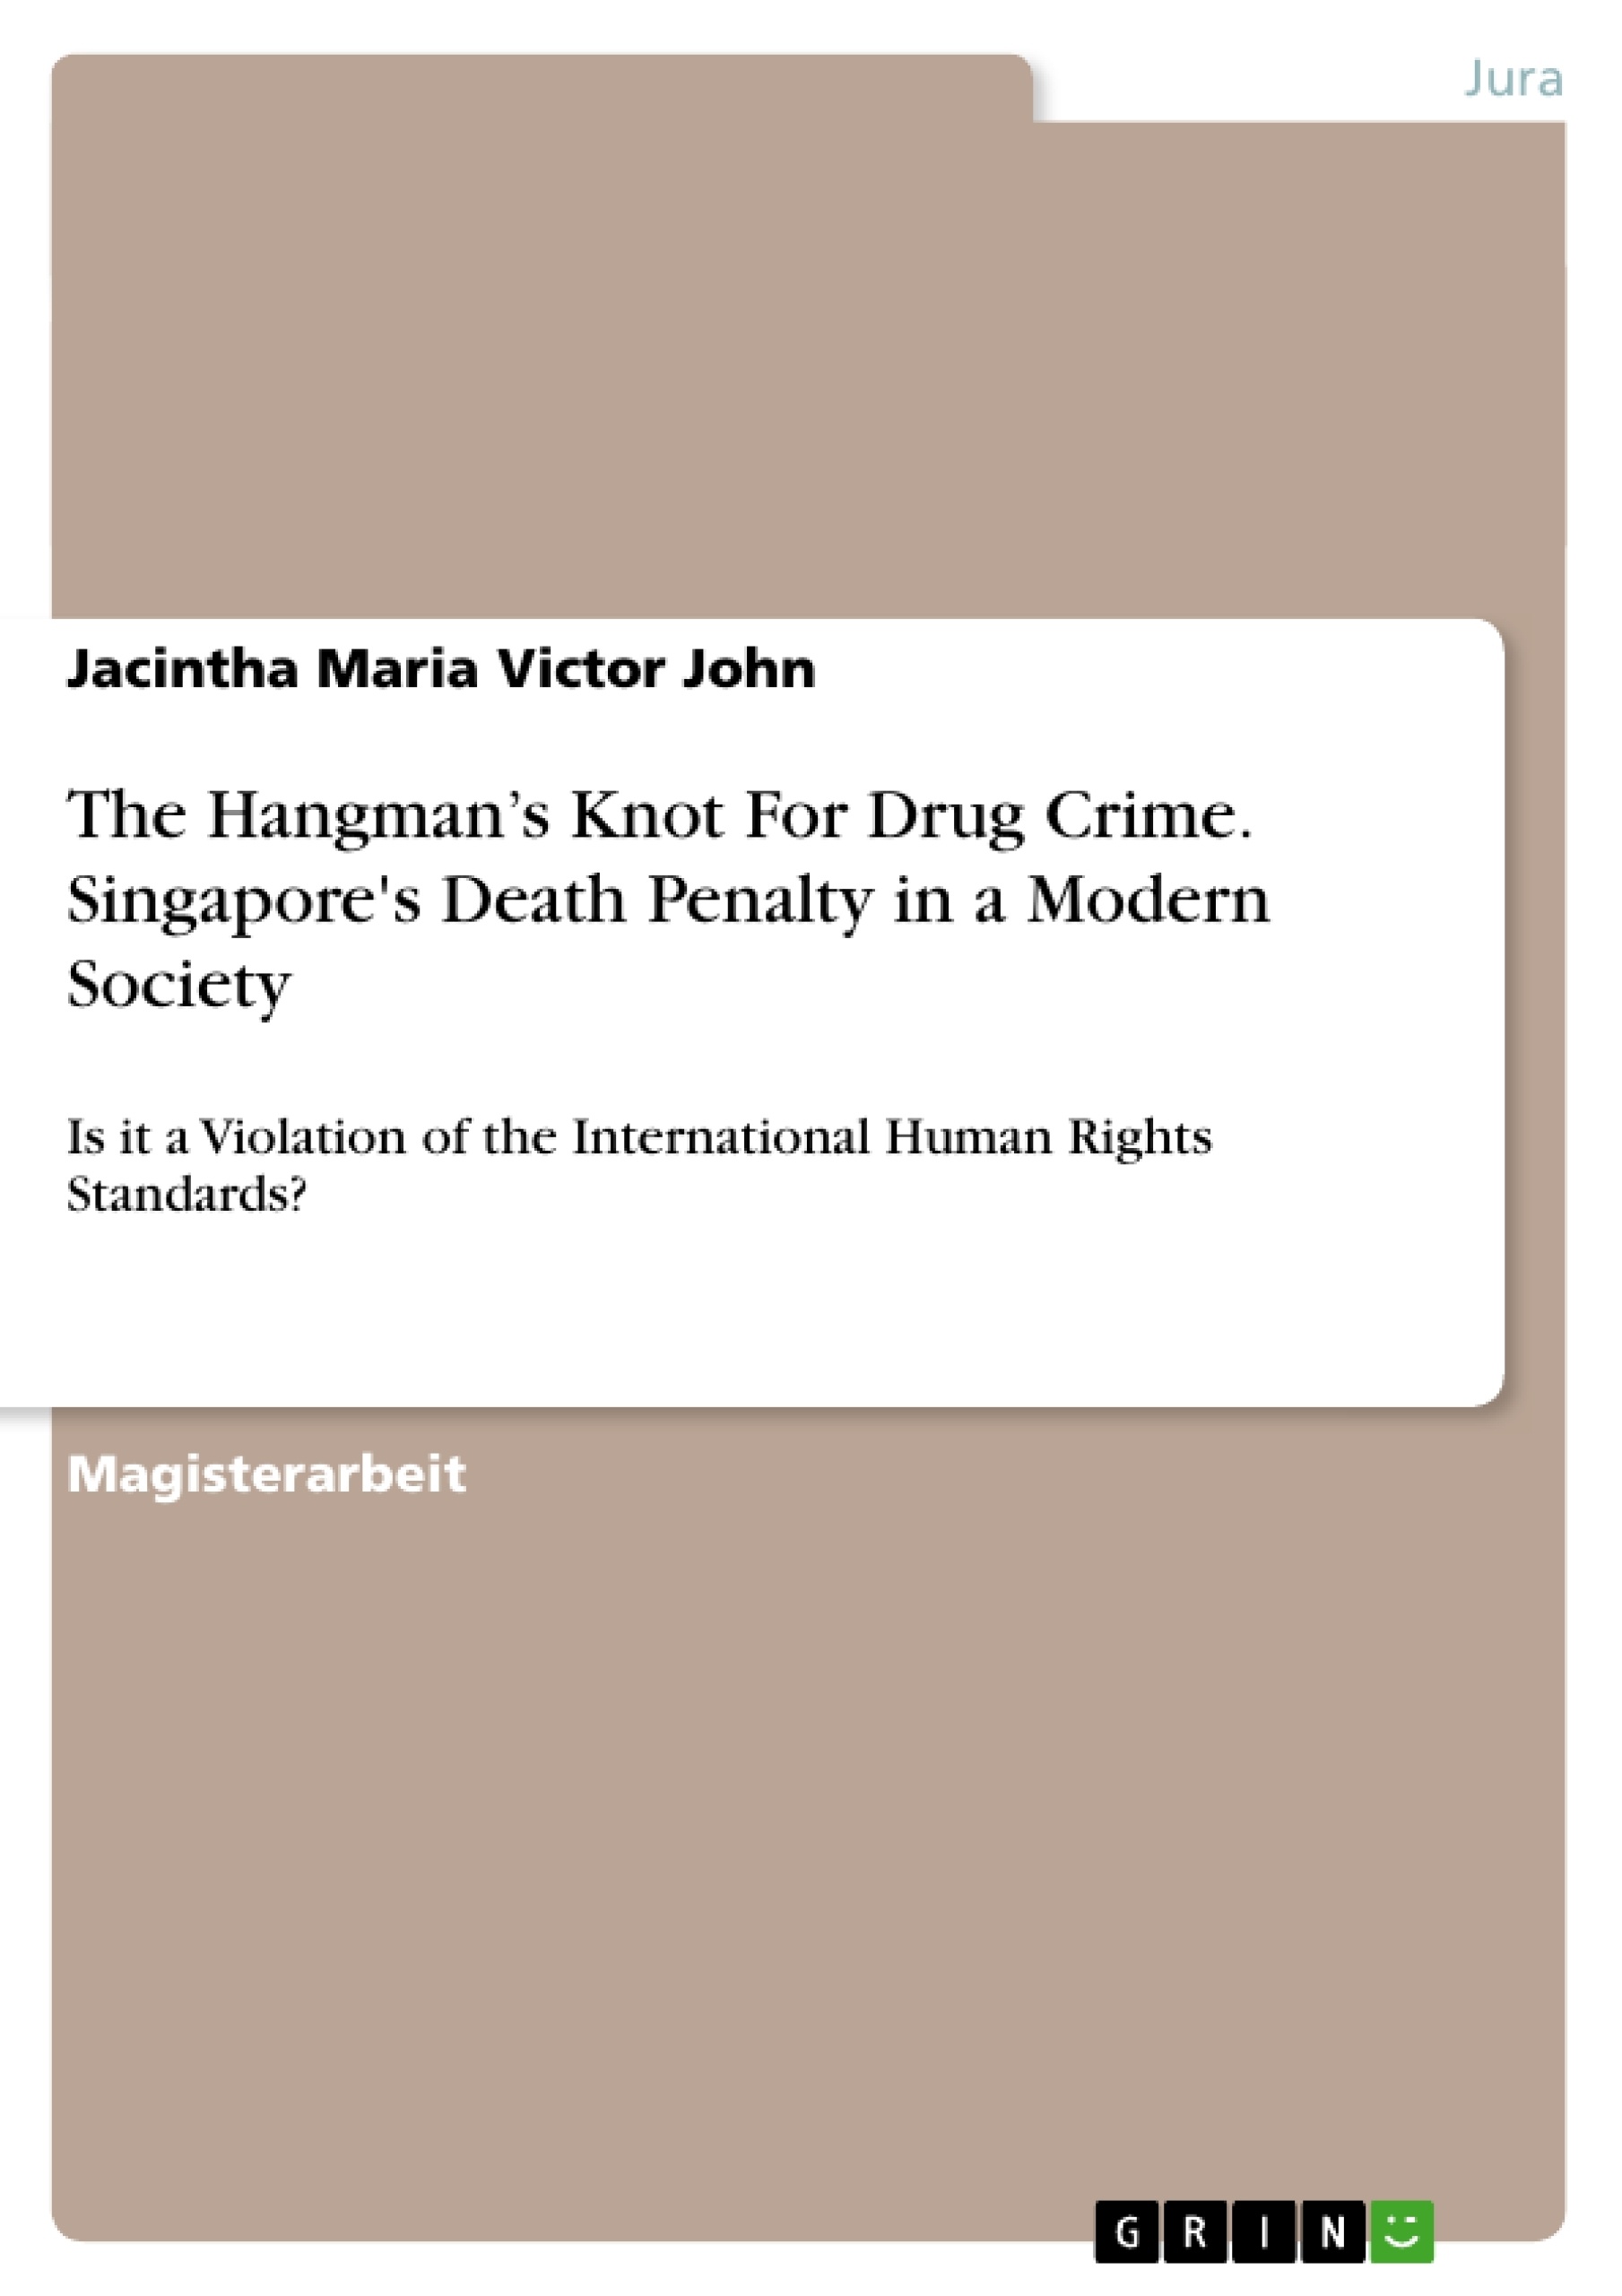 Titel: The Hangman’s Knot For Drug Crime. Singapore's Death Penalty in a Modern Society